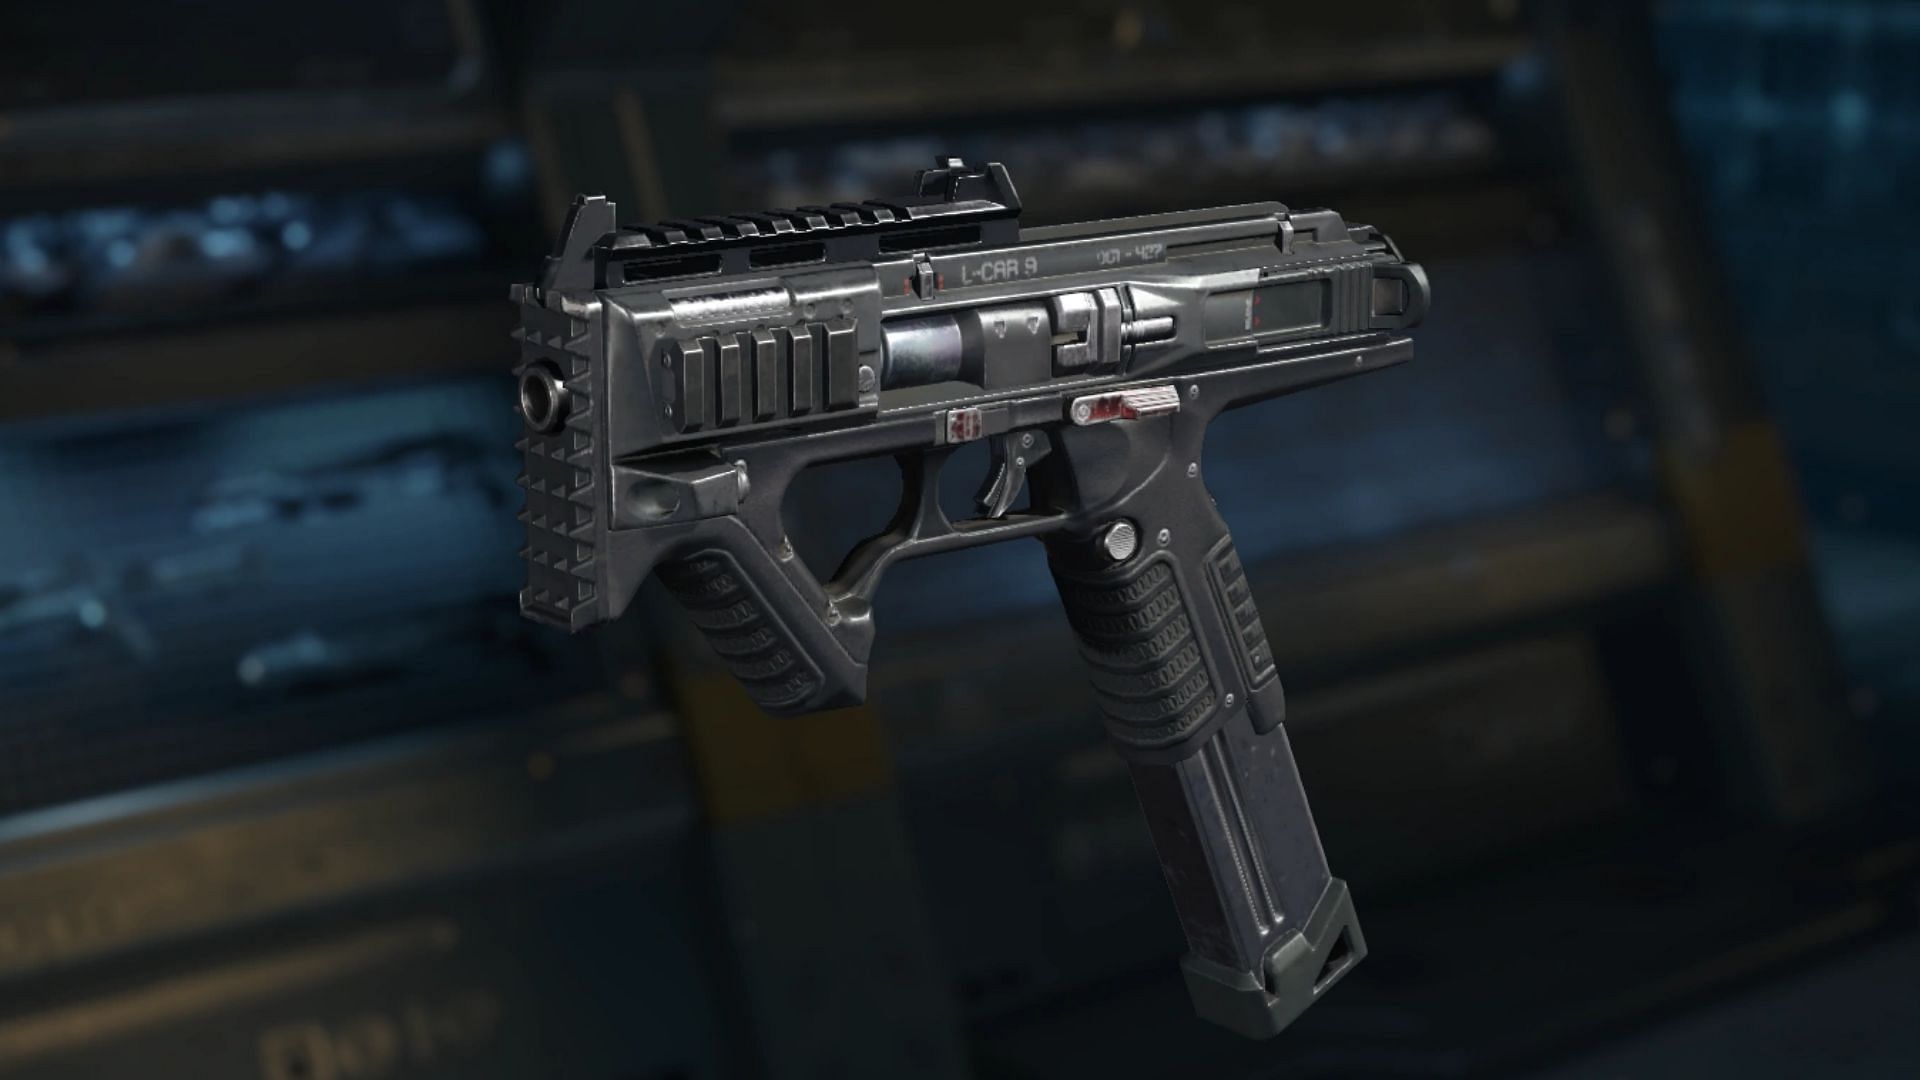 The L-CAR 9 Pistol from Black Ops 3 is coming to COD Mobile, and players can expect it to be released in the upcoming seasons (Image via Activision)